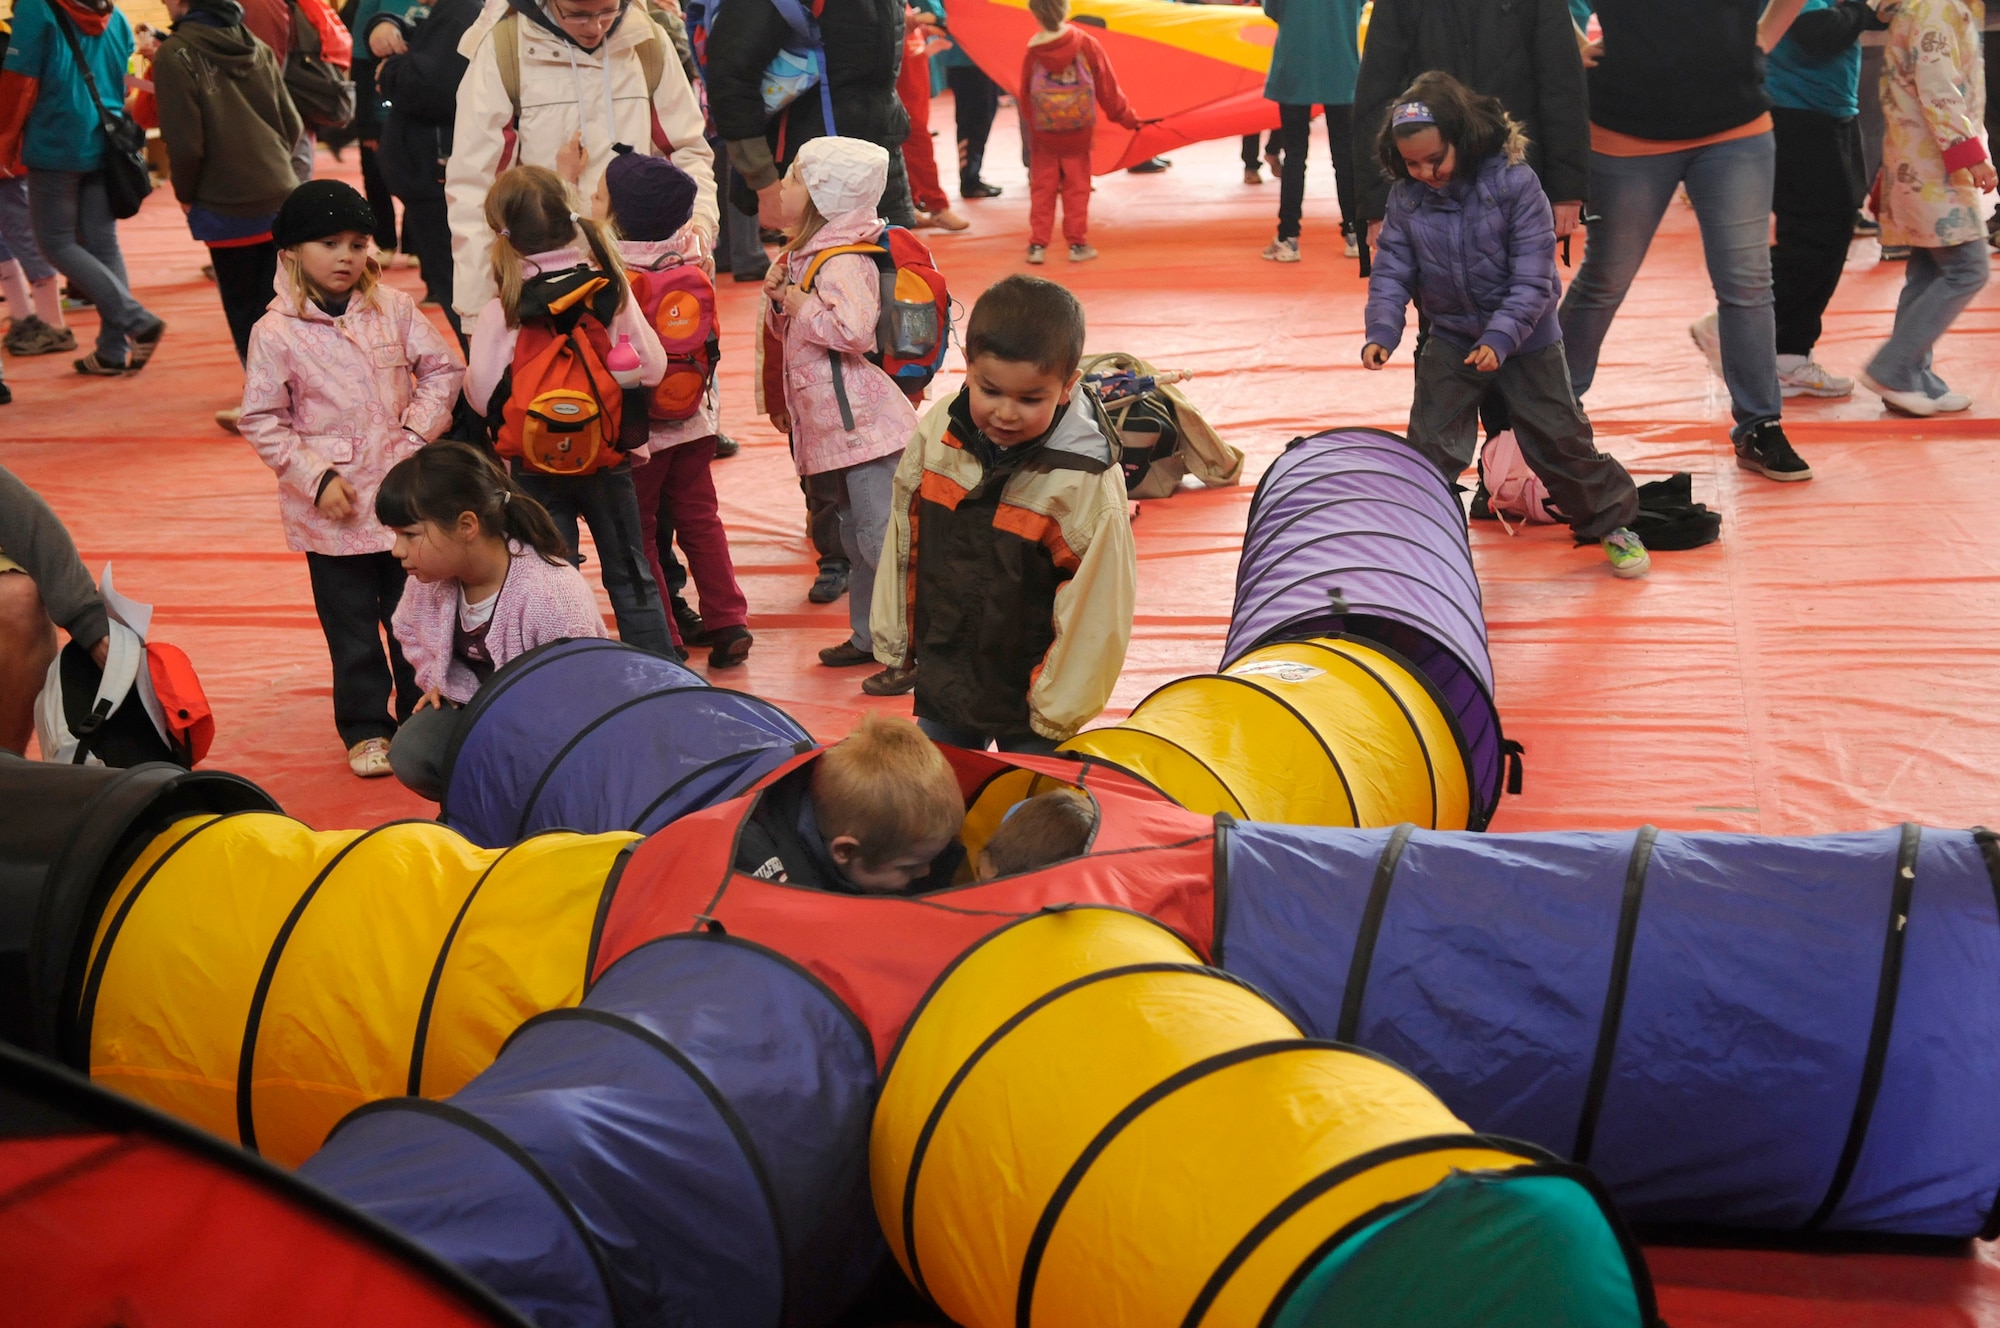 Children crawl through a worm tunnel during the Special Olympics held in Enkenbach-Alsenborn, Germany, May 12, 2010. Special Olympics is a worldwide event for children and adults with disabilities to build confidence and foster friendship. The Kaiserslautern Military Community hosted its 27th Annual Special Olympics for over 800 athletes. (U.S. Air Force photo by Airman 1st Class Desiree Esposito)